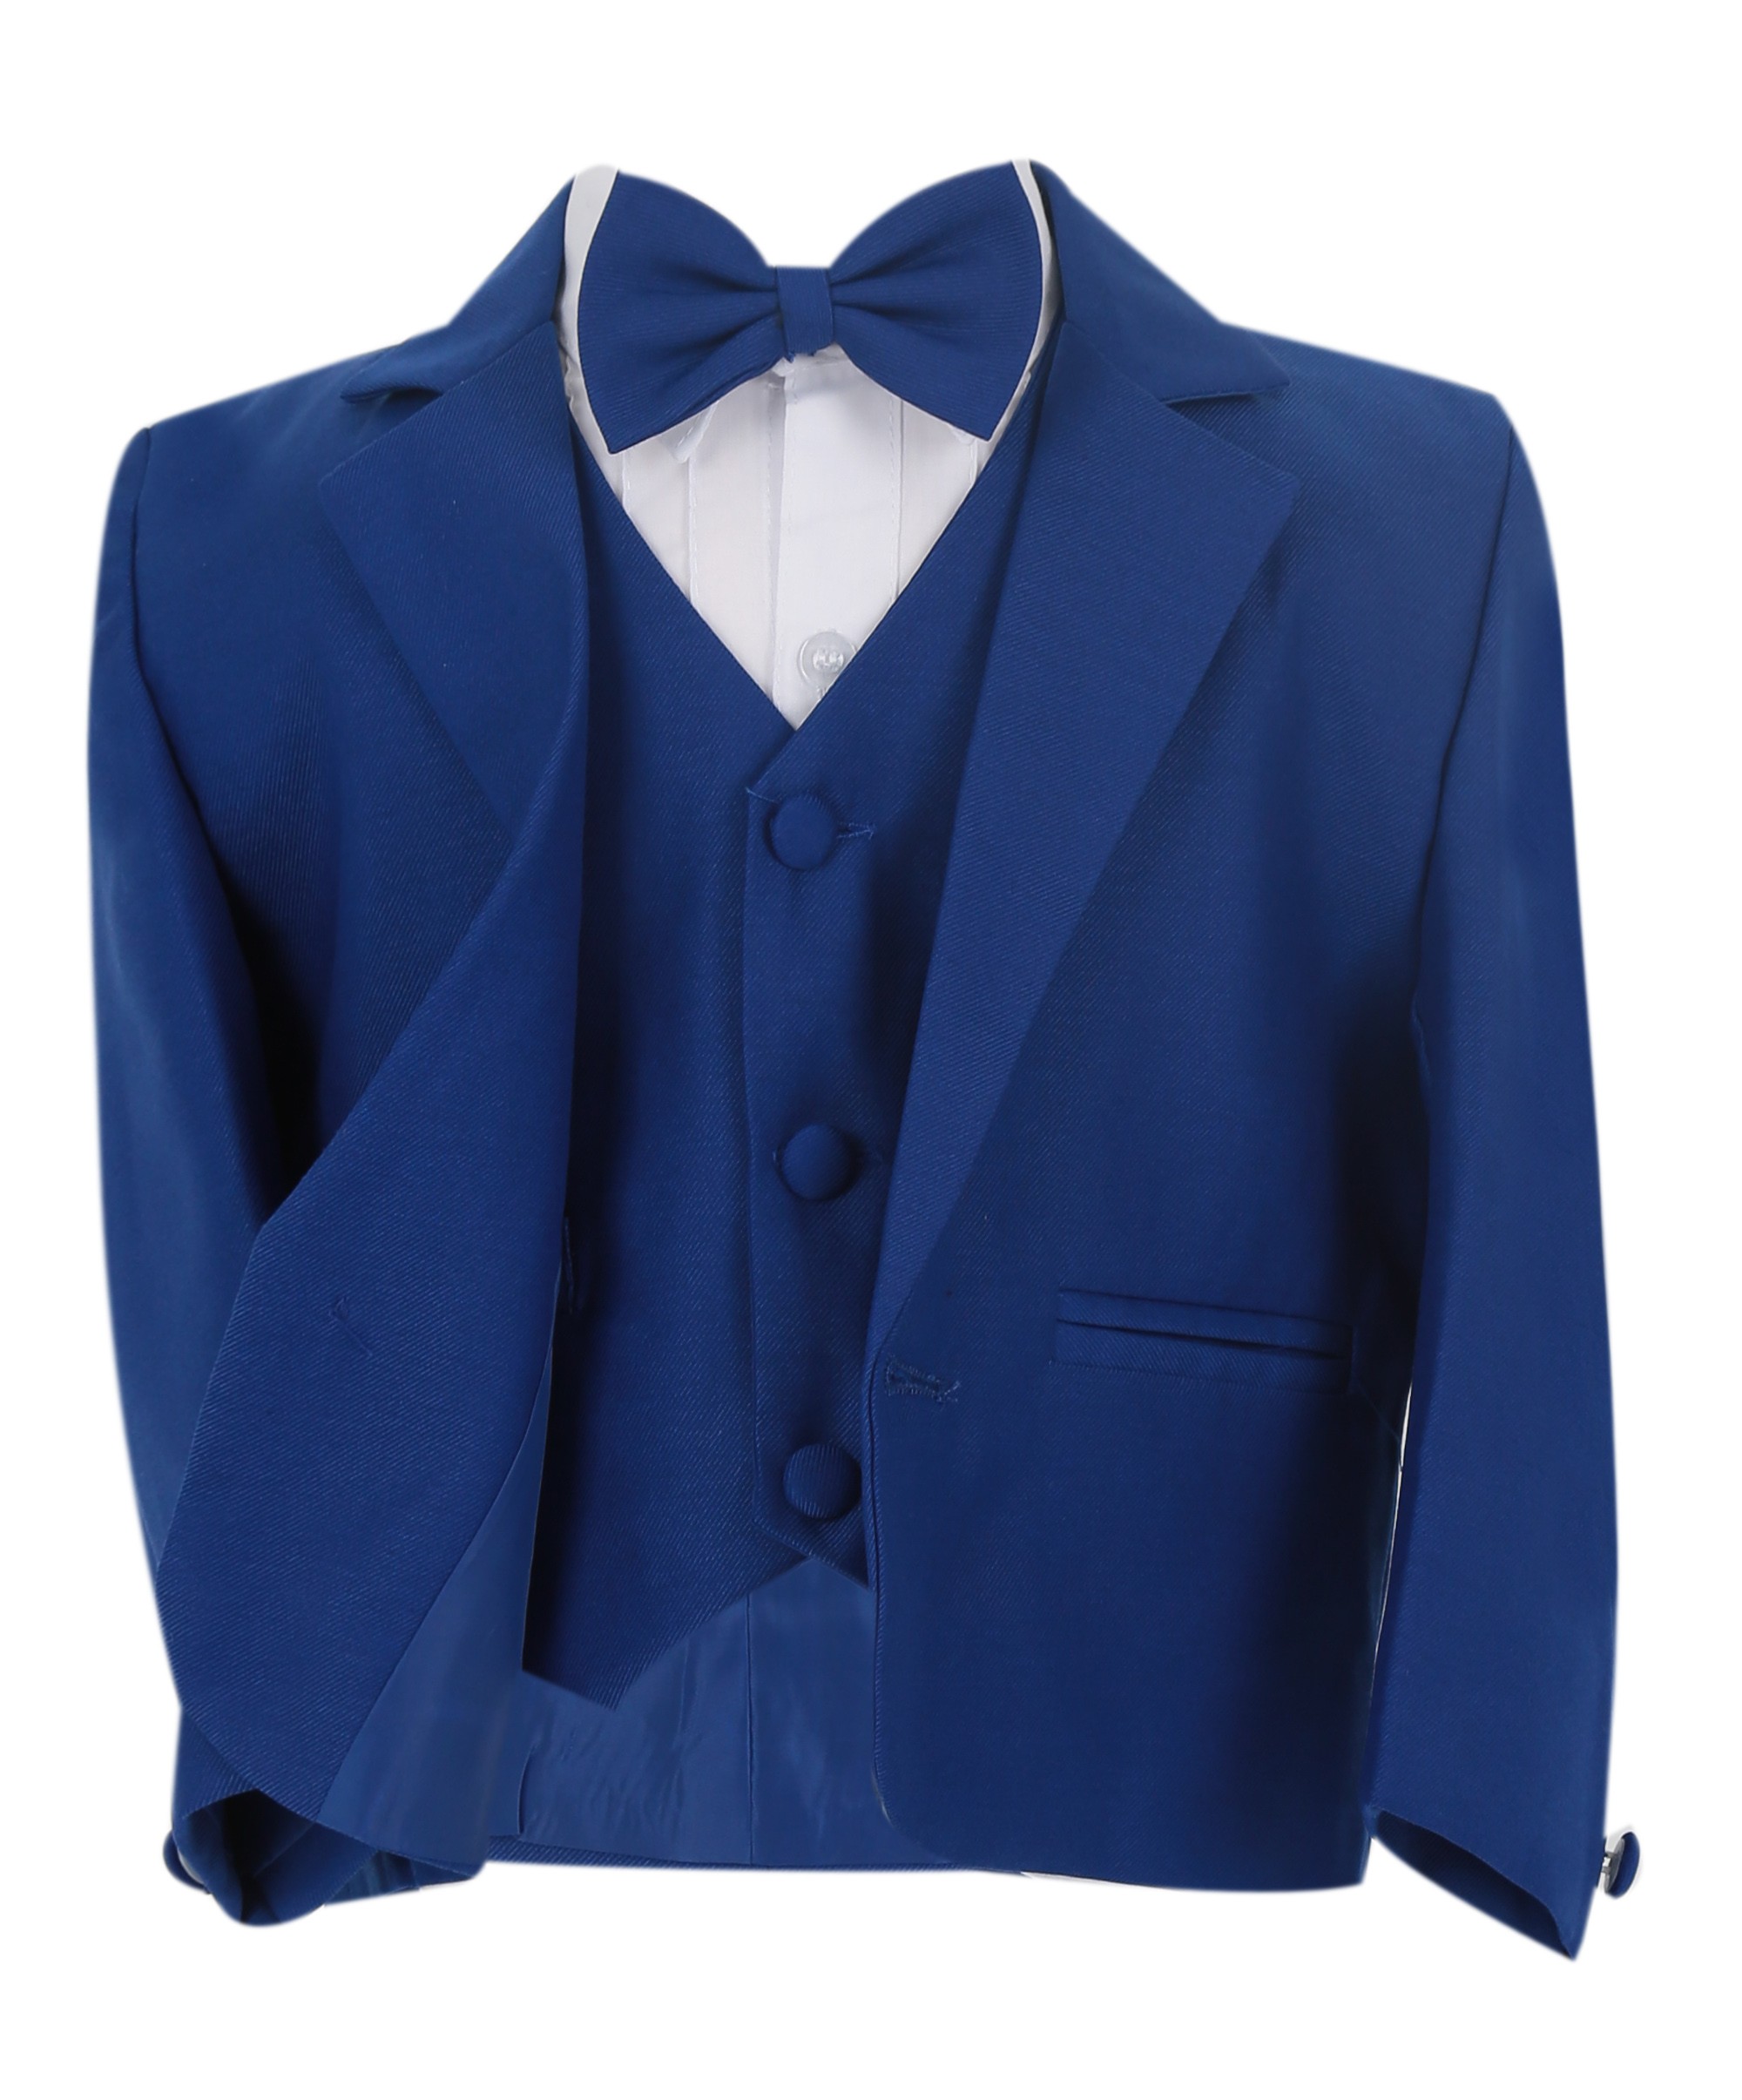 Baby Boy Formal Suit All in One Set - Royal Blue